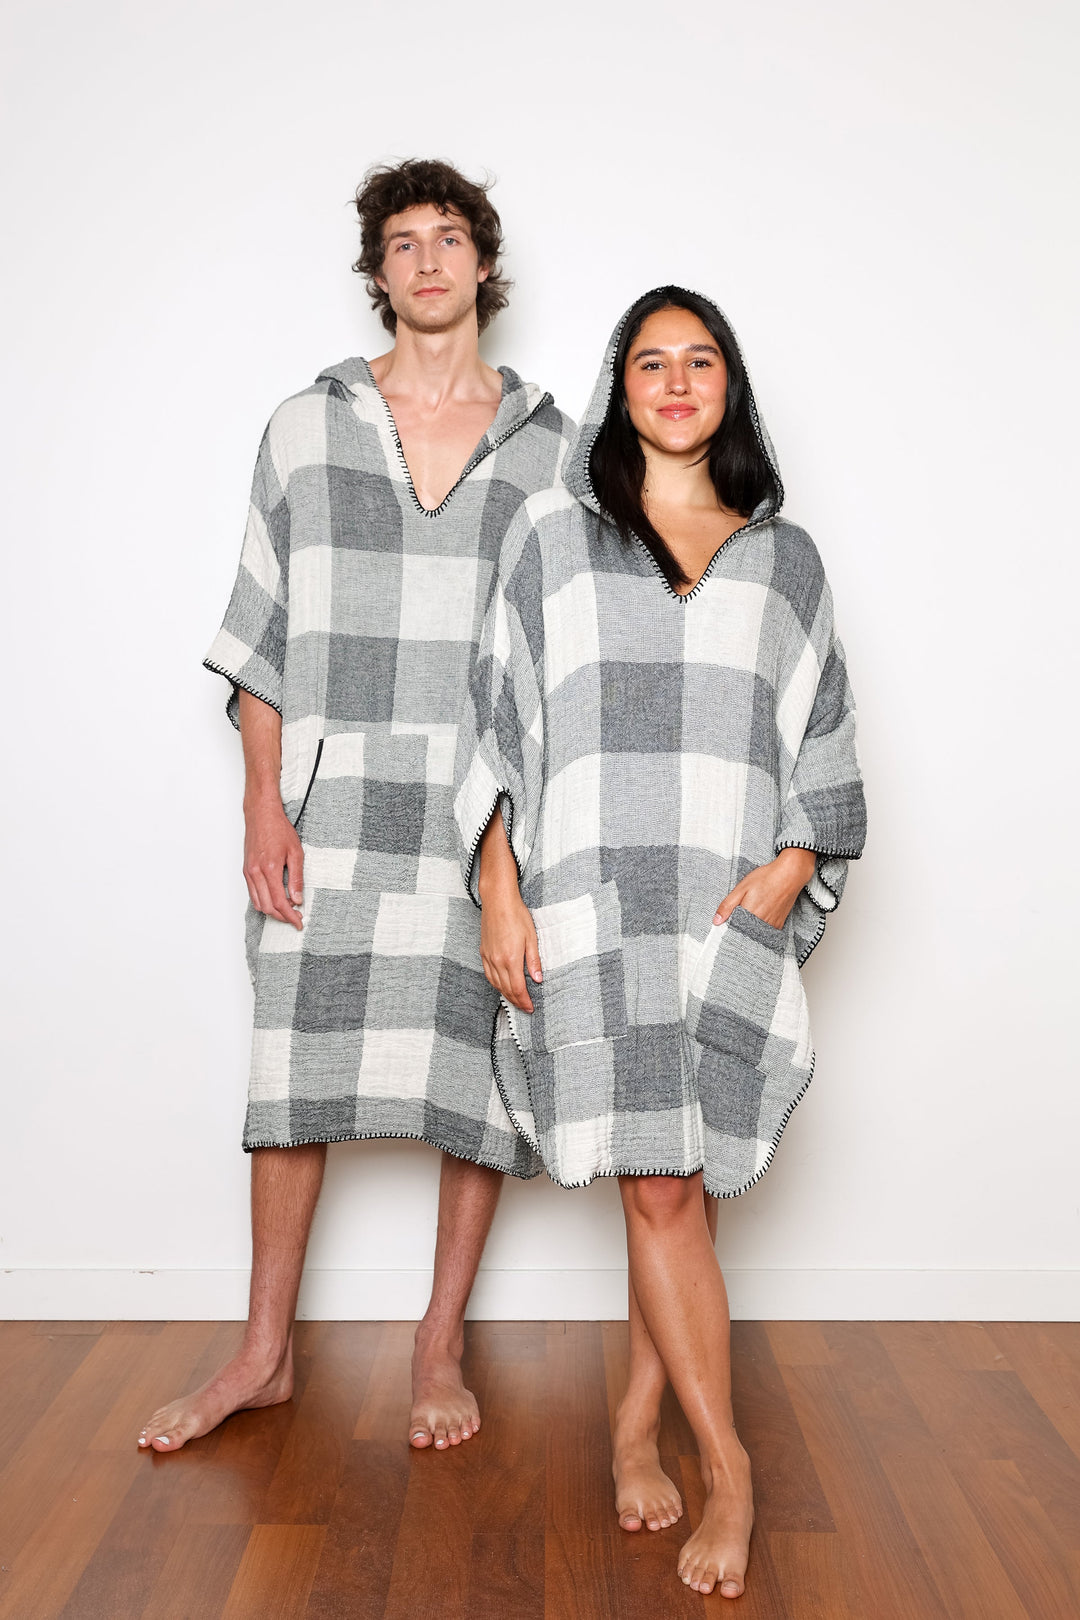 THE LIMITED EDITION PLAID COCOON | Men's Muslin Surf Poncho